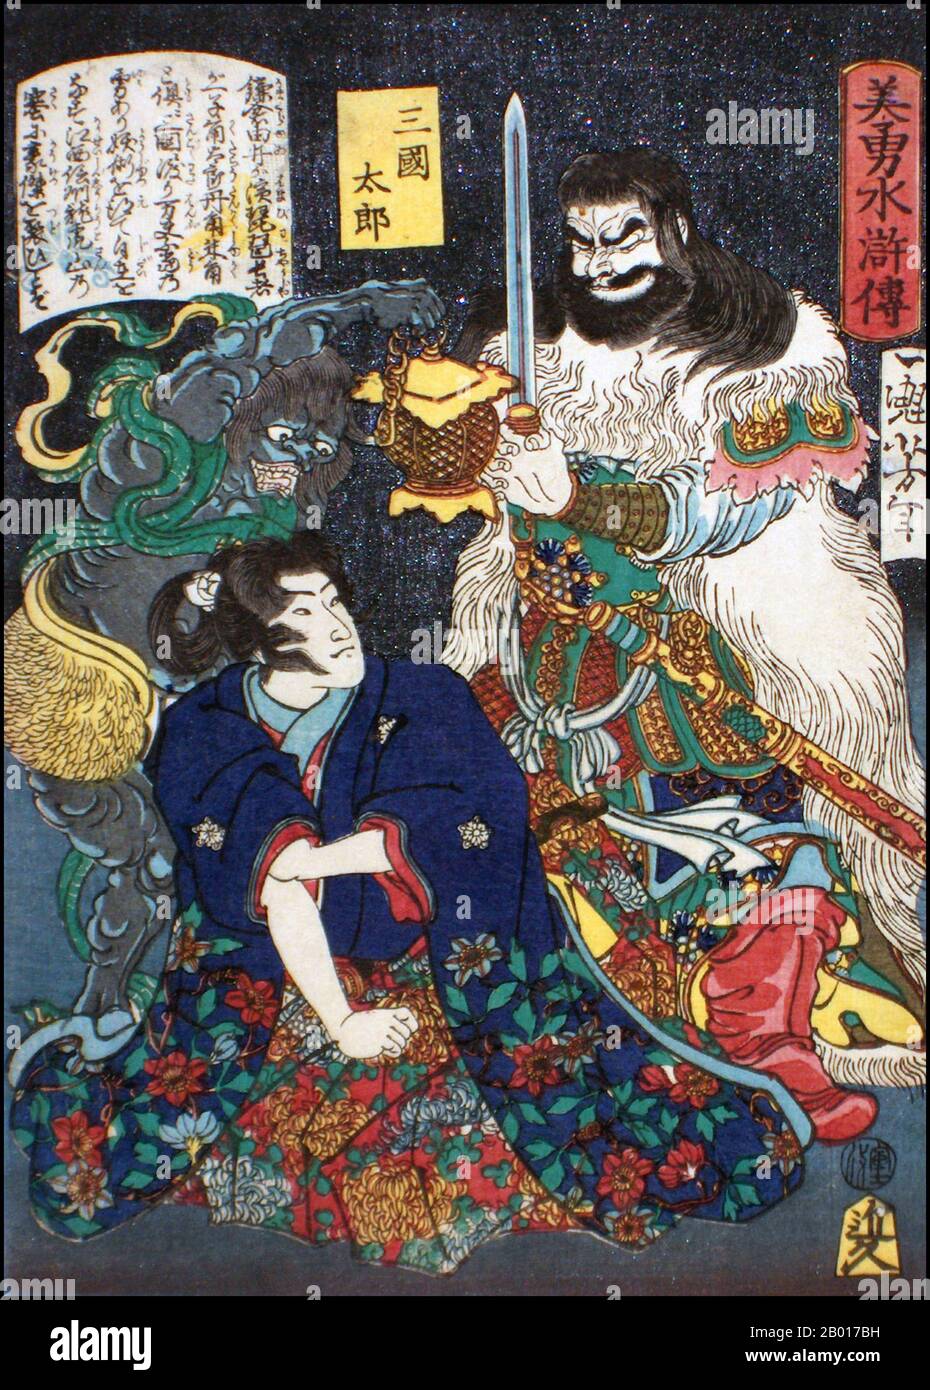 Japan: 'Sangoku Taro Kneeling before Demon and Warrior'. Ukiyo-e woodblock print from the series 'Heroes of the Water Margin' by Tsukioka Yoshitoshi (1839 - 9 June 1892), 1866.  Tsukioka Yoshitoshi, also named Taiso Yoshitoshi, was a Japanese artist. He is widely recognized as the last great master of Ukiyo-e, a type of Japanese woodblock printing. He is additionally regarded as one of the form's greatest innovators. His career spanned two eras – the last years of feudal Japan, and the first years of modern Japan following the Meiji Restoration. Stock Photo